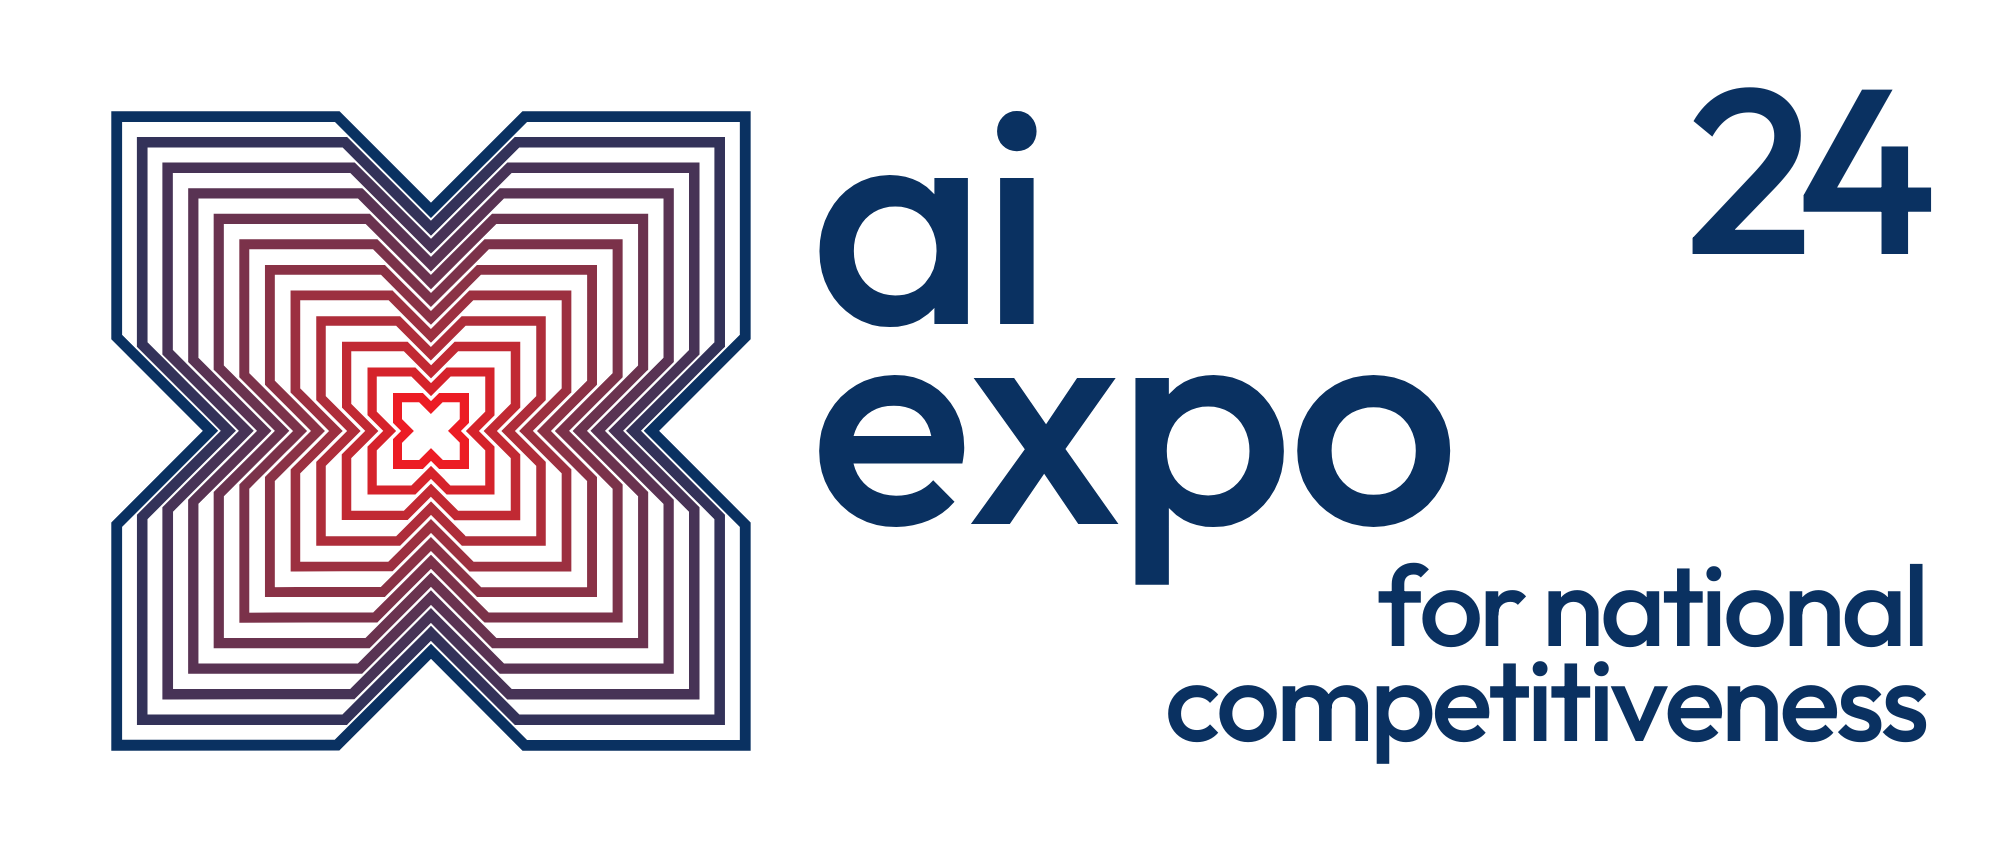 REGISTER FOR THE SPECIAL COMPETITIVE STUDIES PROJECT’S AI EXPO FOR NATIONAL COMPETITIVENESS